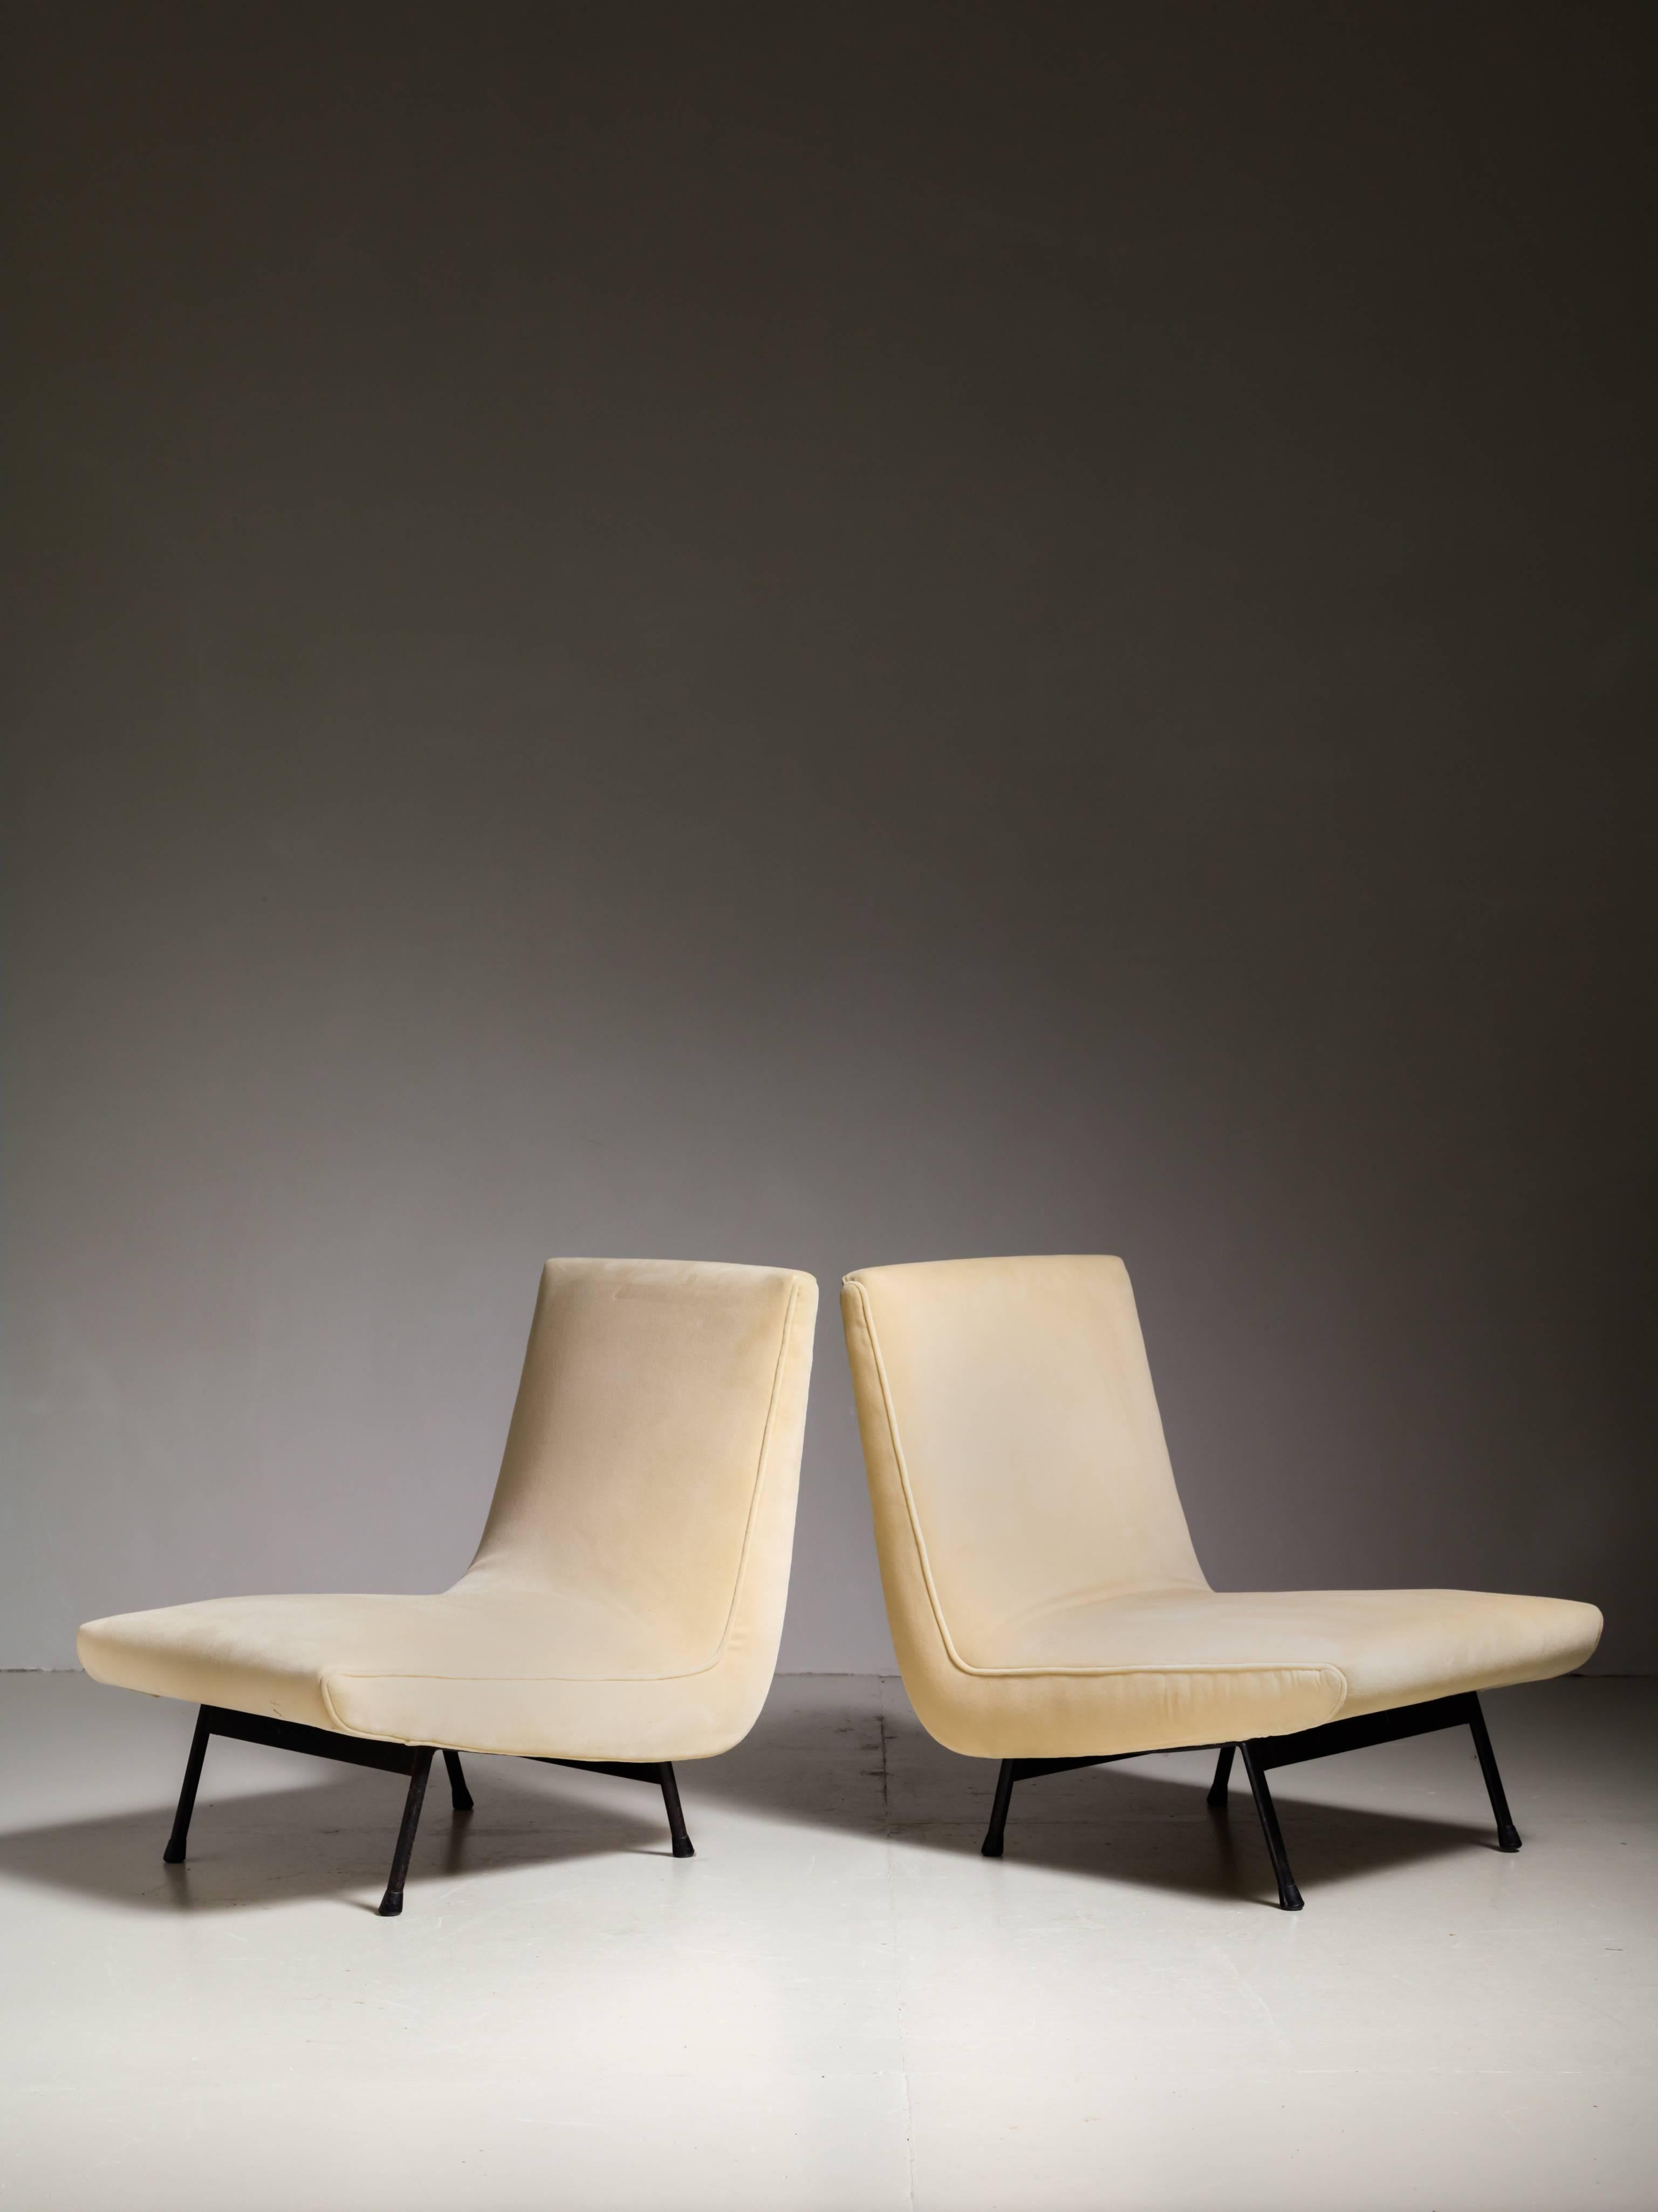 A wonderful pair of low lounge chairs. They were reupholstered in a cream white heavy velvetlike fabric, close to the original. Original and perfect singles. Excellent condition.